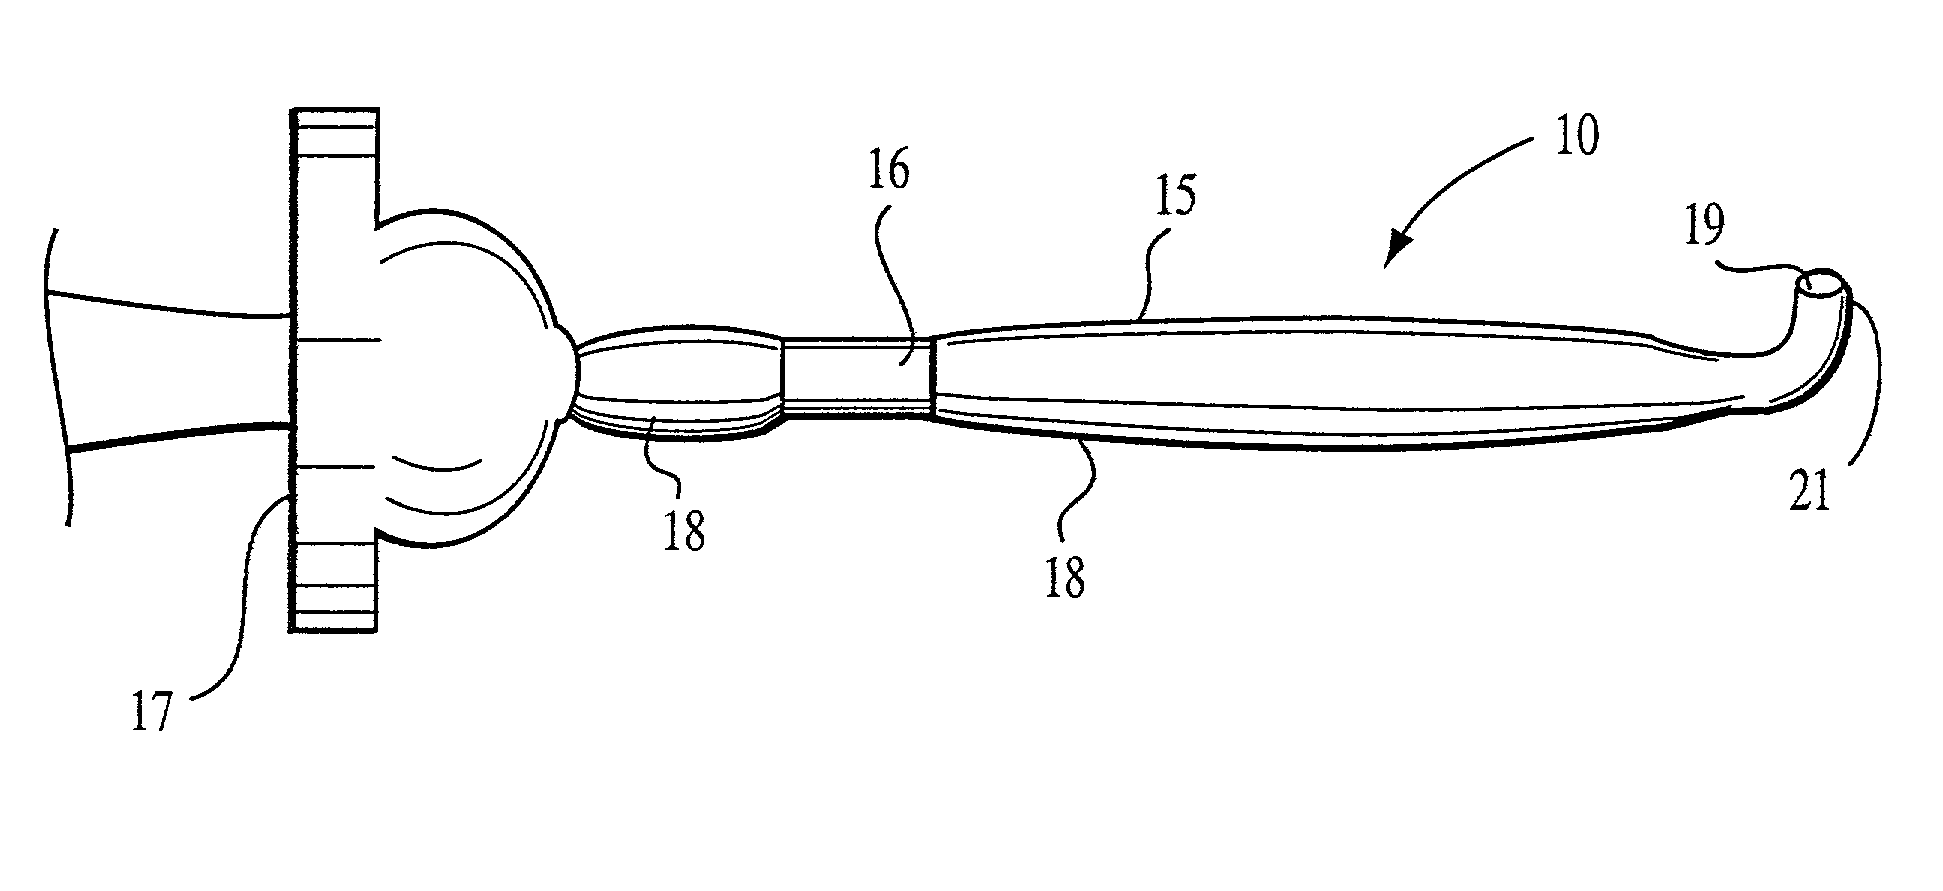 Dynamically compliant catheter